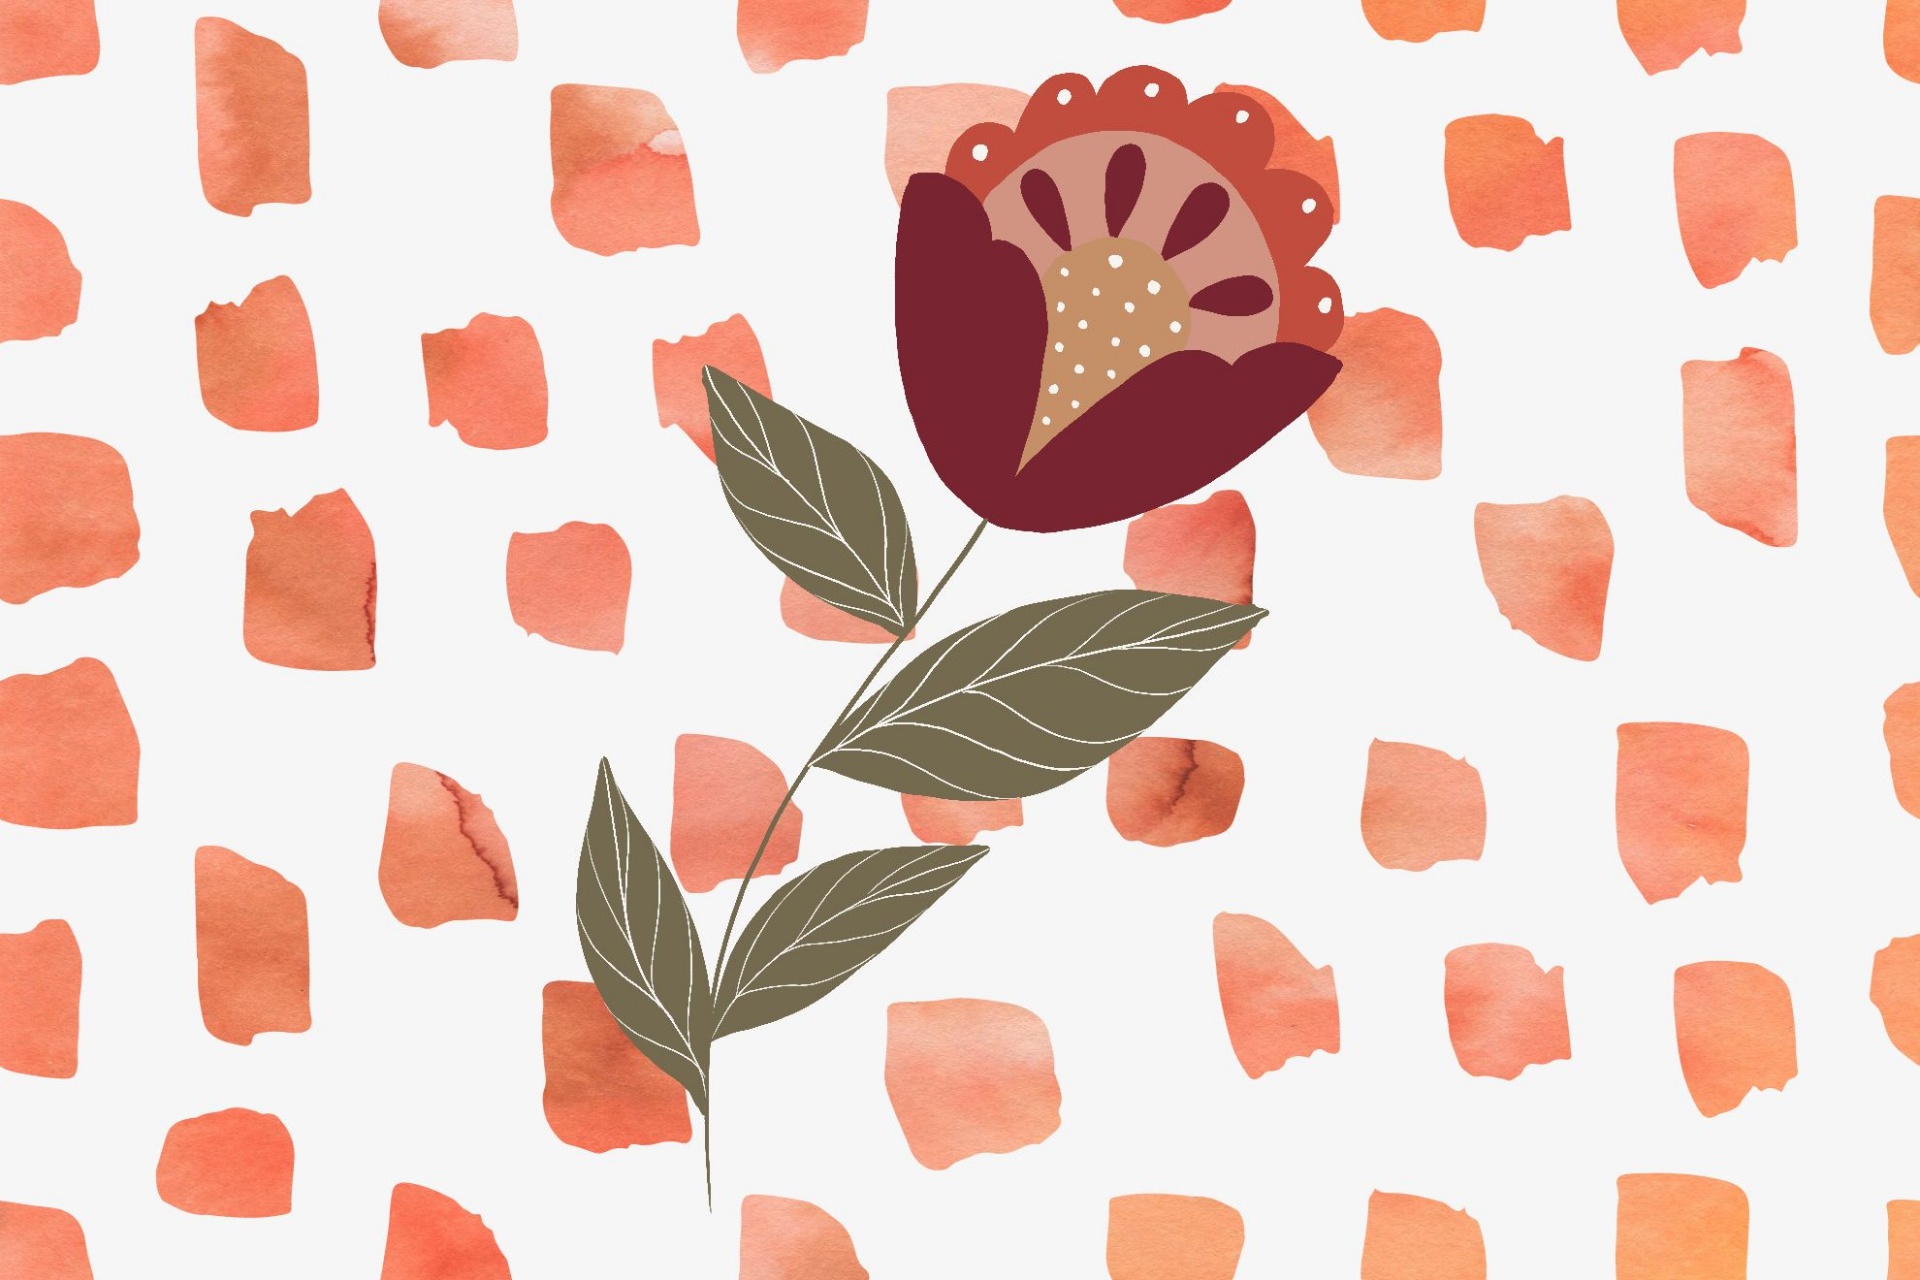 flower drawing on abstract shape background